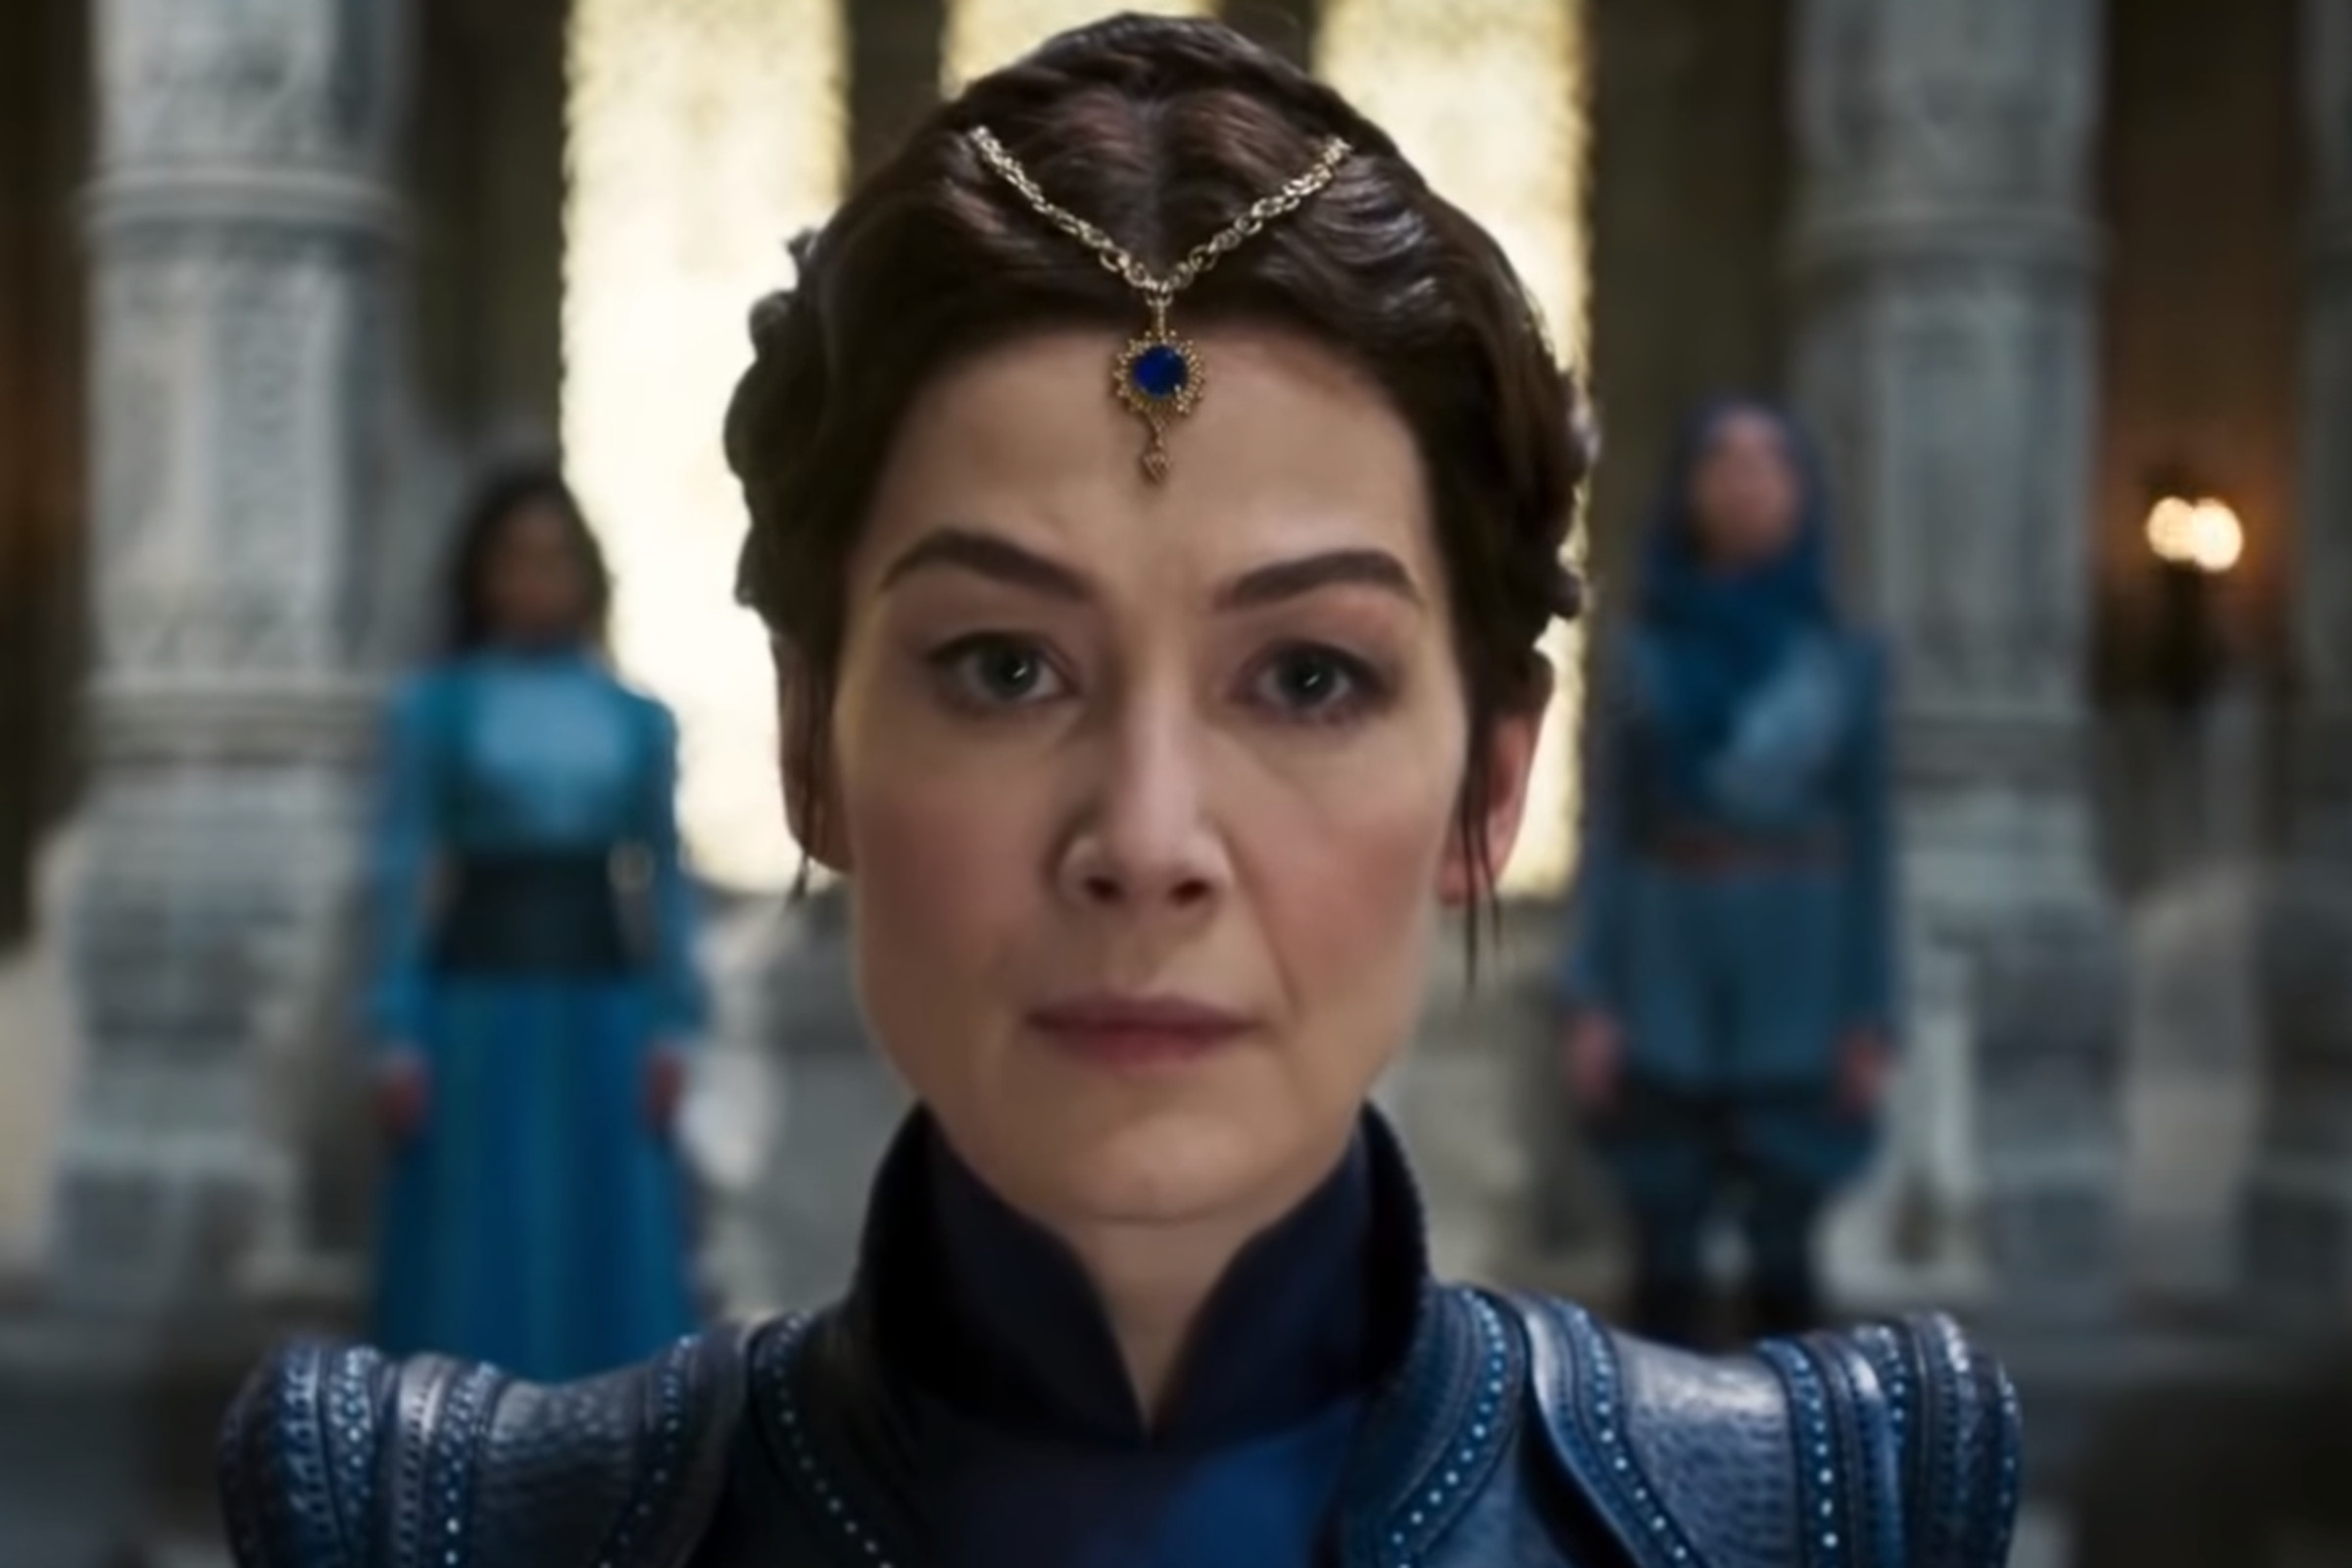 Rosamund Pike stars in The Wheel of Time